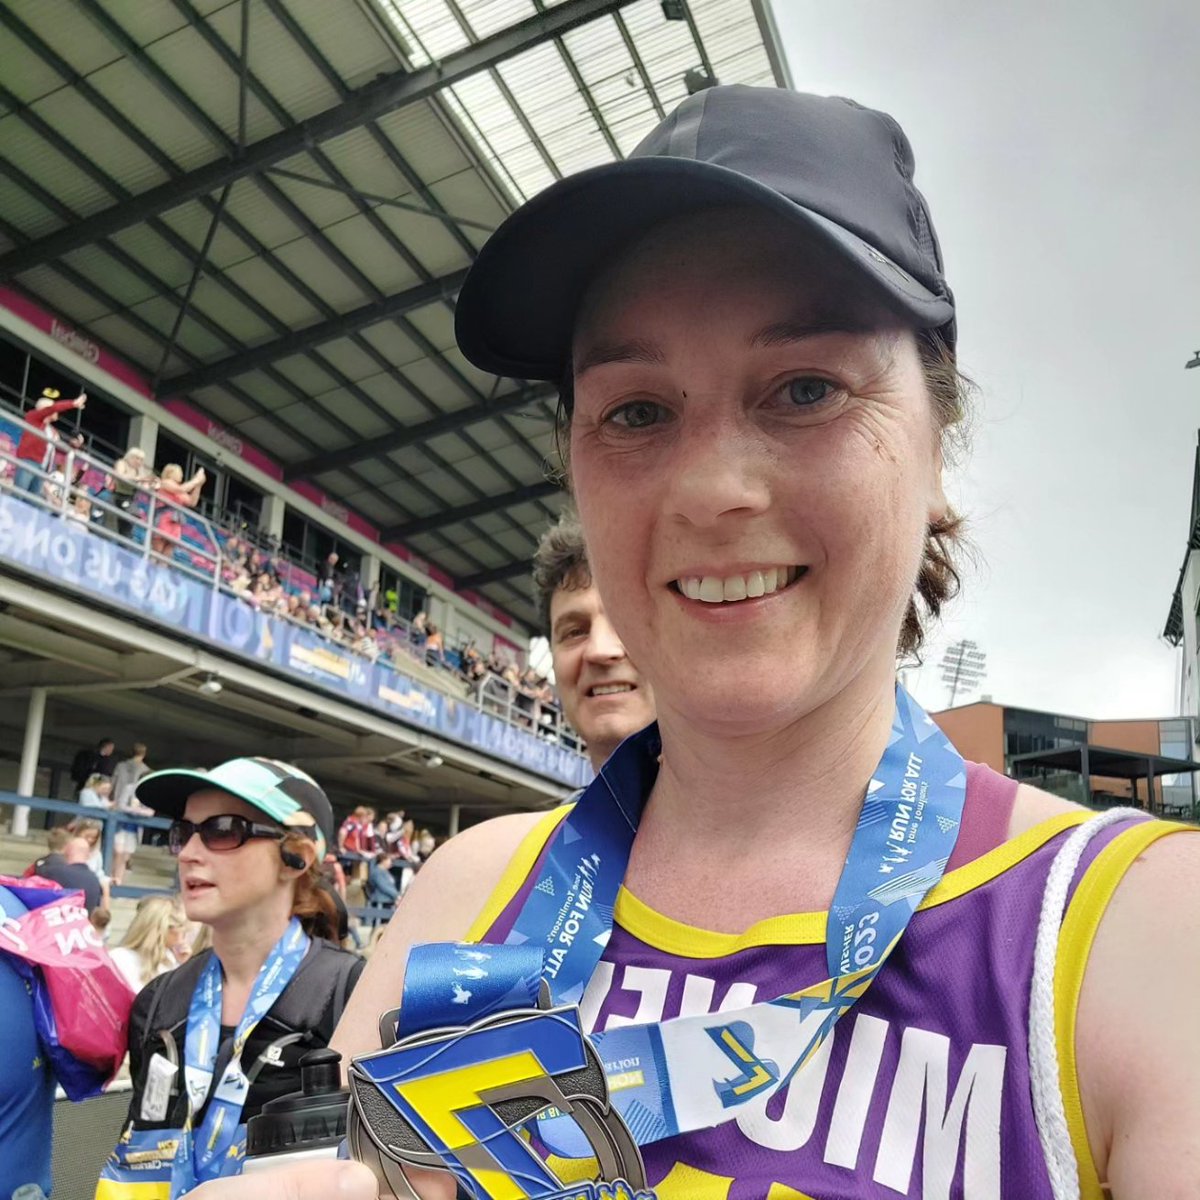 I did it! 26.2 miles completed in a respectable time. It was a hilly and warm route, but the crowds were unbelievable. Seeing the children helped climb the hill at mile 18. @AtaxiaUK so pleased to have raised some vital funds. #leedsmarathon #thisgirlcan #runforall #ataxia